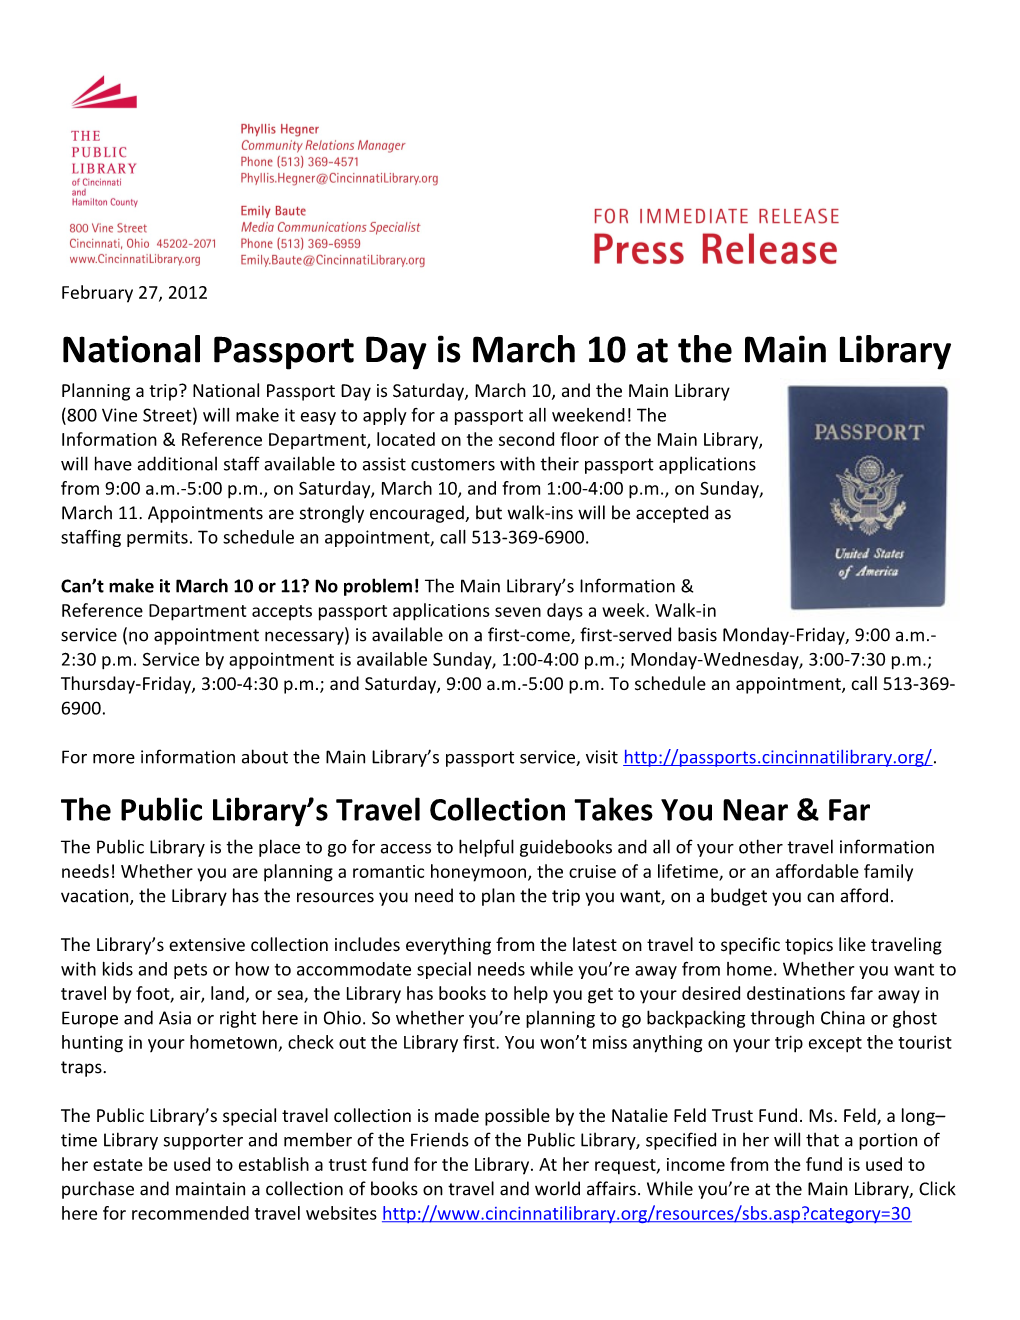 National Passport Day, March 10